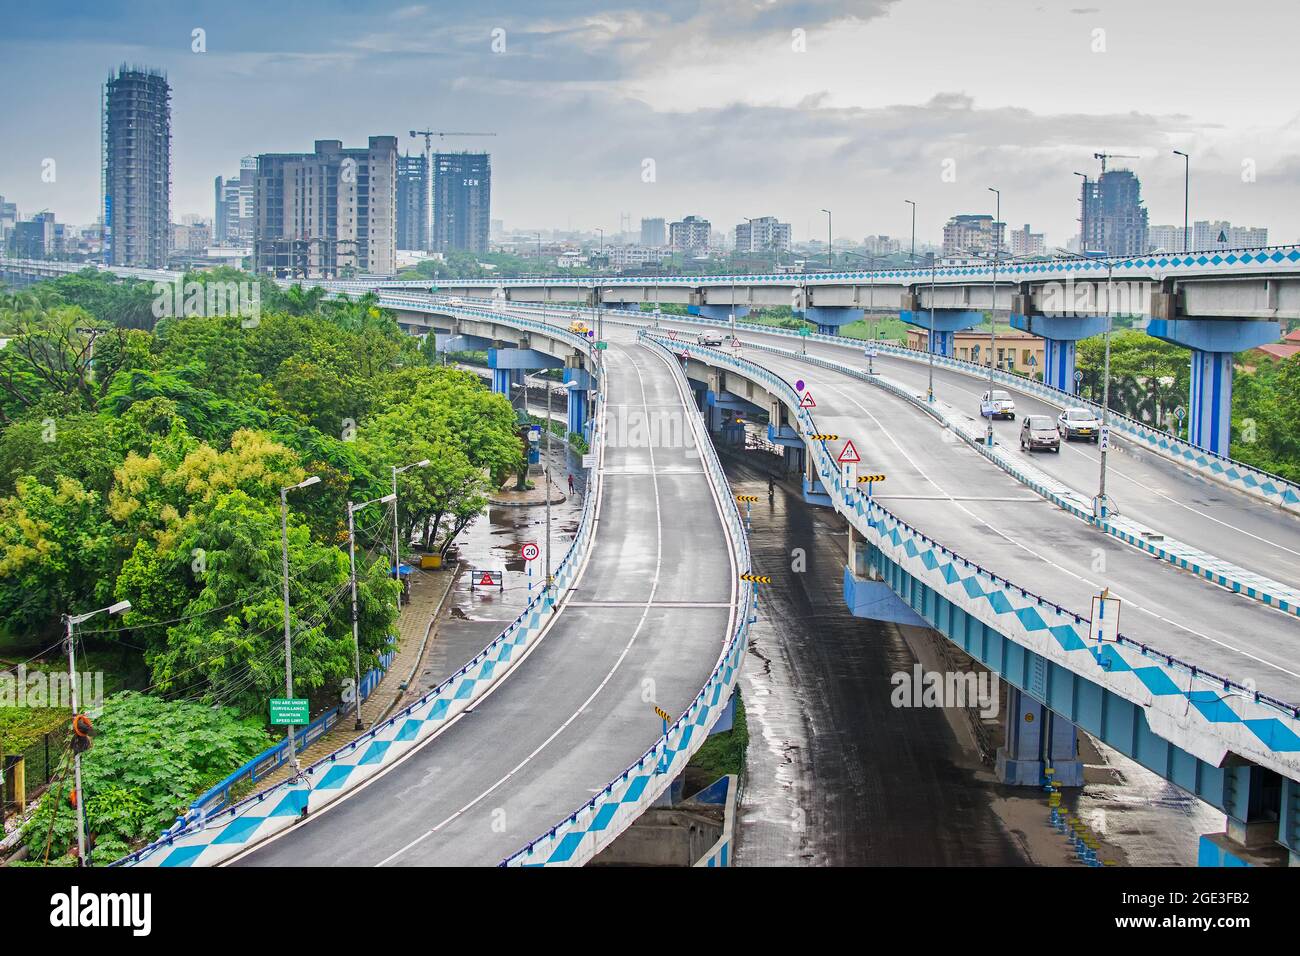 Parama Island flyover, popularly known as Ma or Maa flyover is a 4.5 kilometer long flyover in Kolkata. It is built as a traffic corridor from Alipore Stock Photo